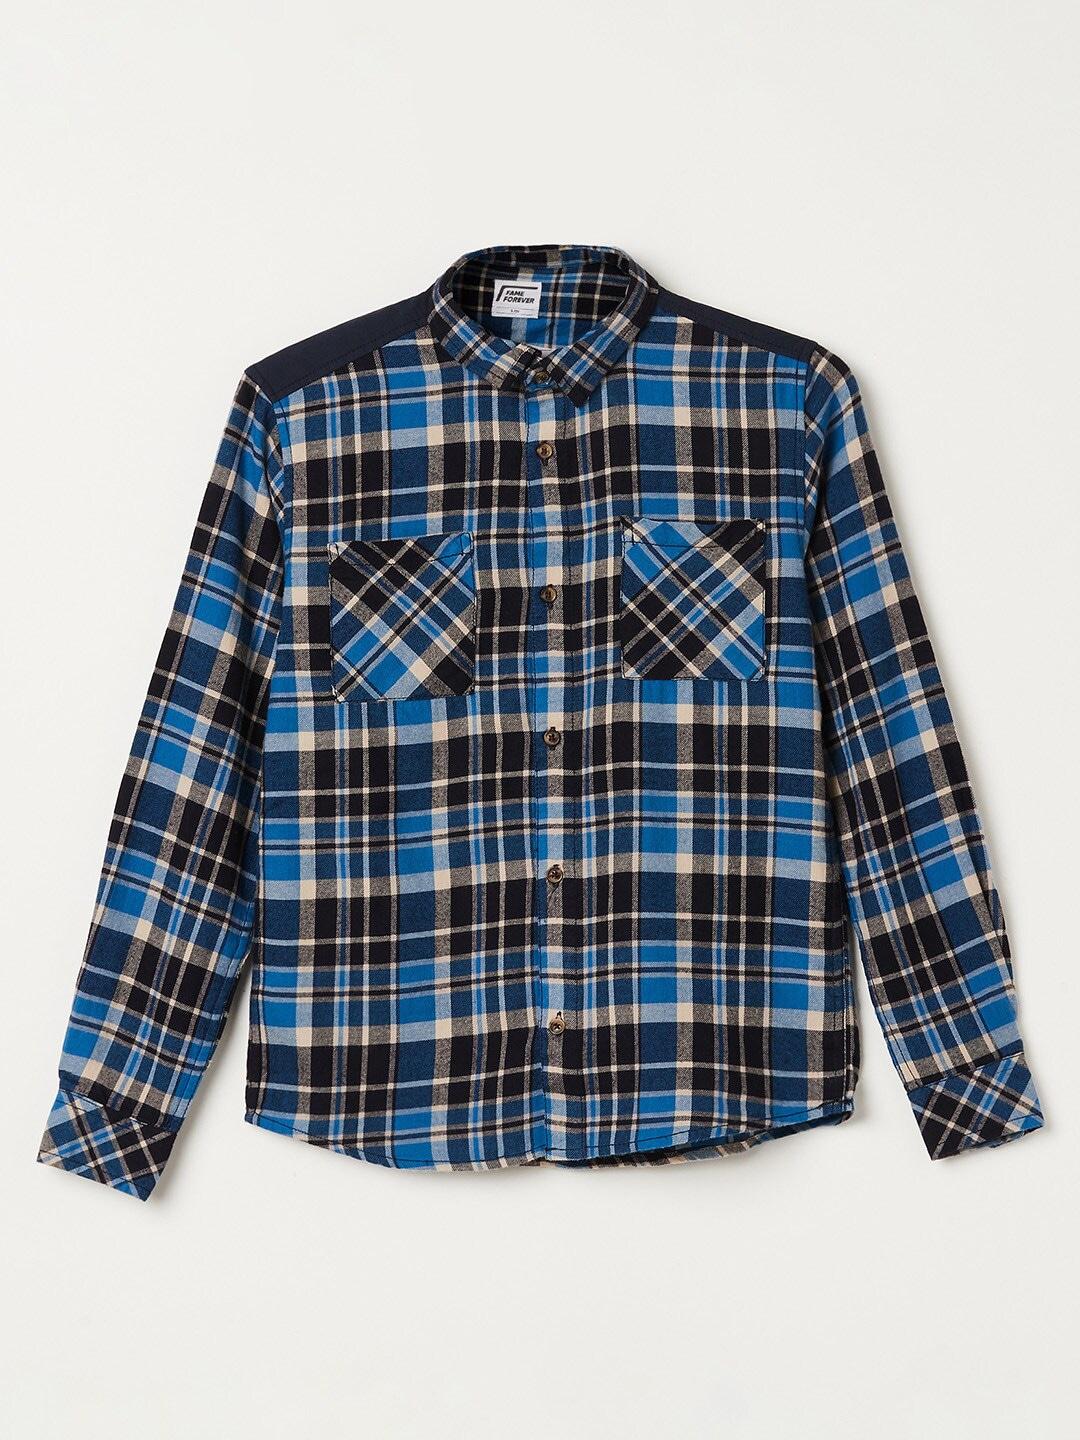 Fame Forever by Lifestyle Boys Tartan Checked Casual Pure Cotton Shirt